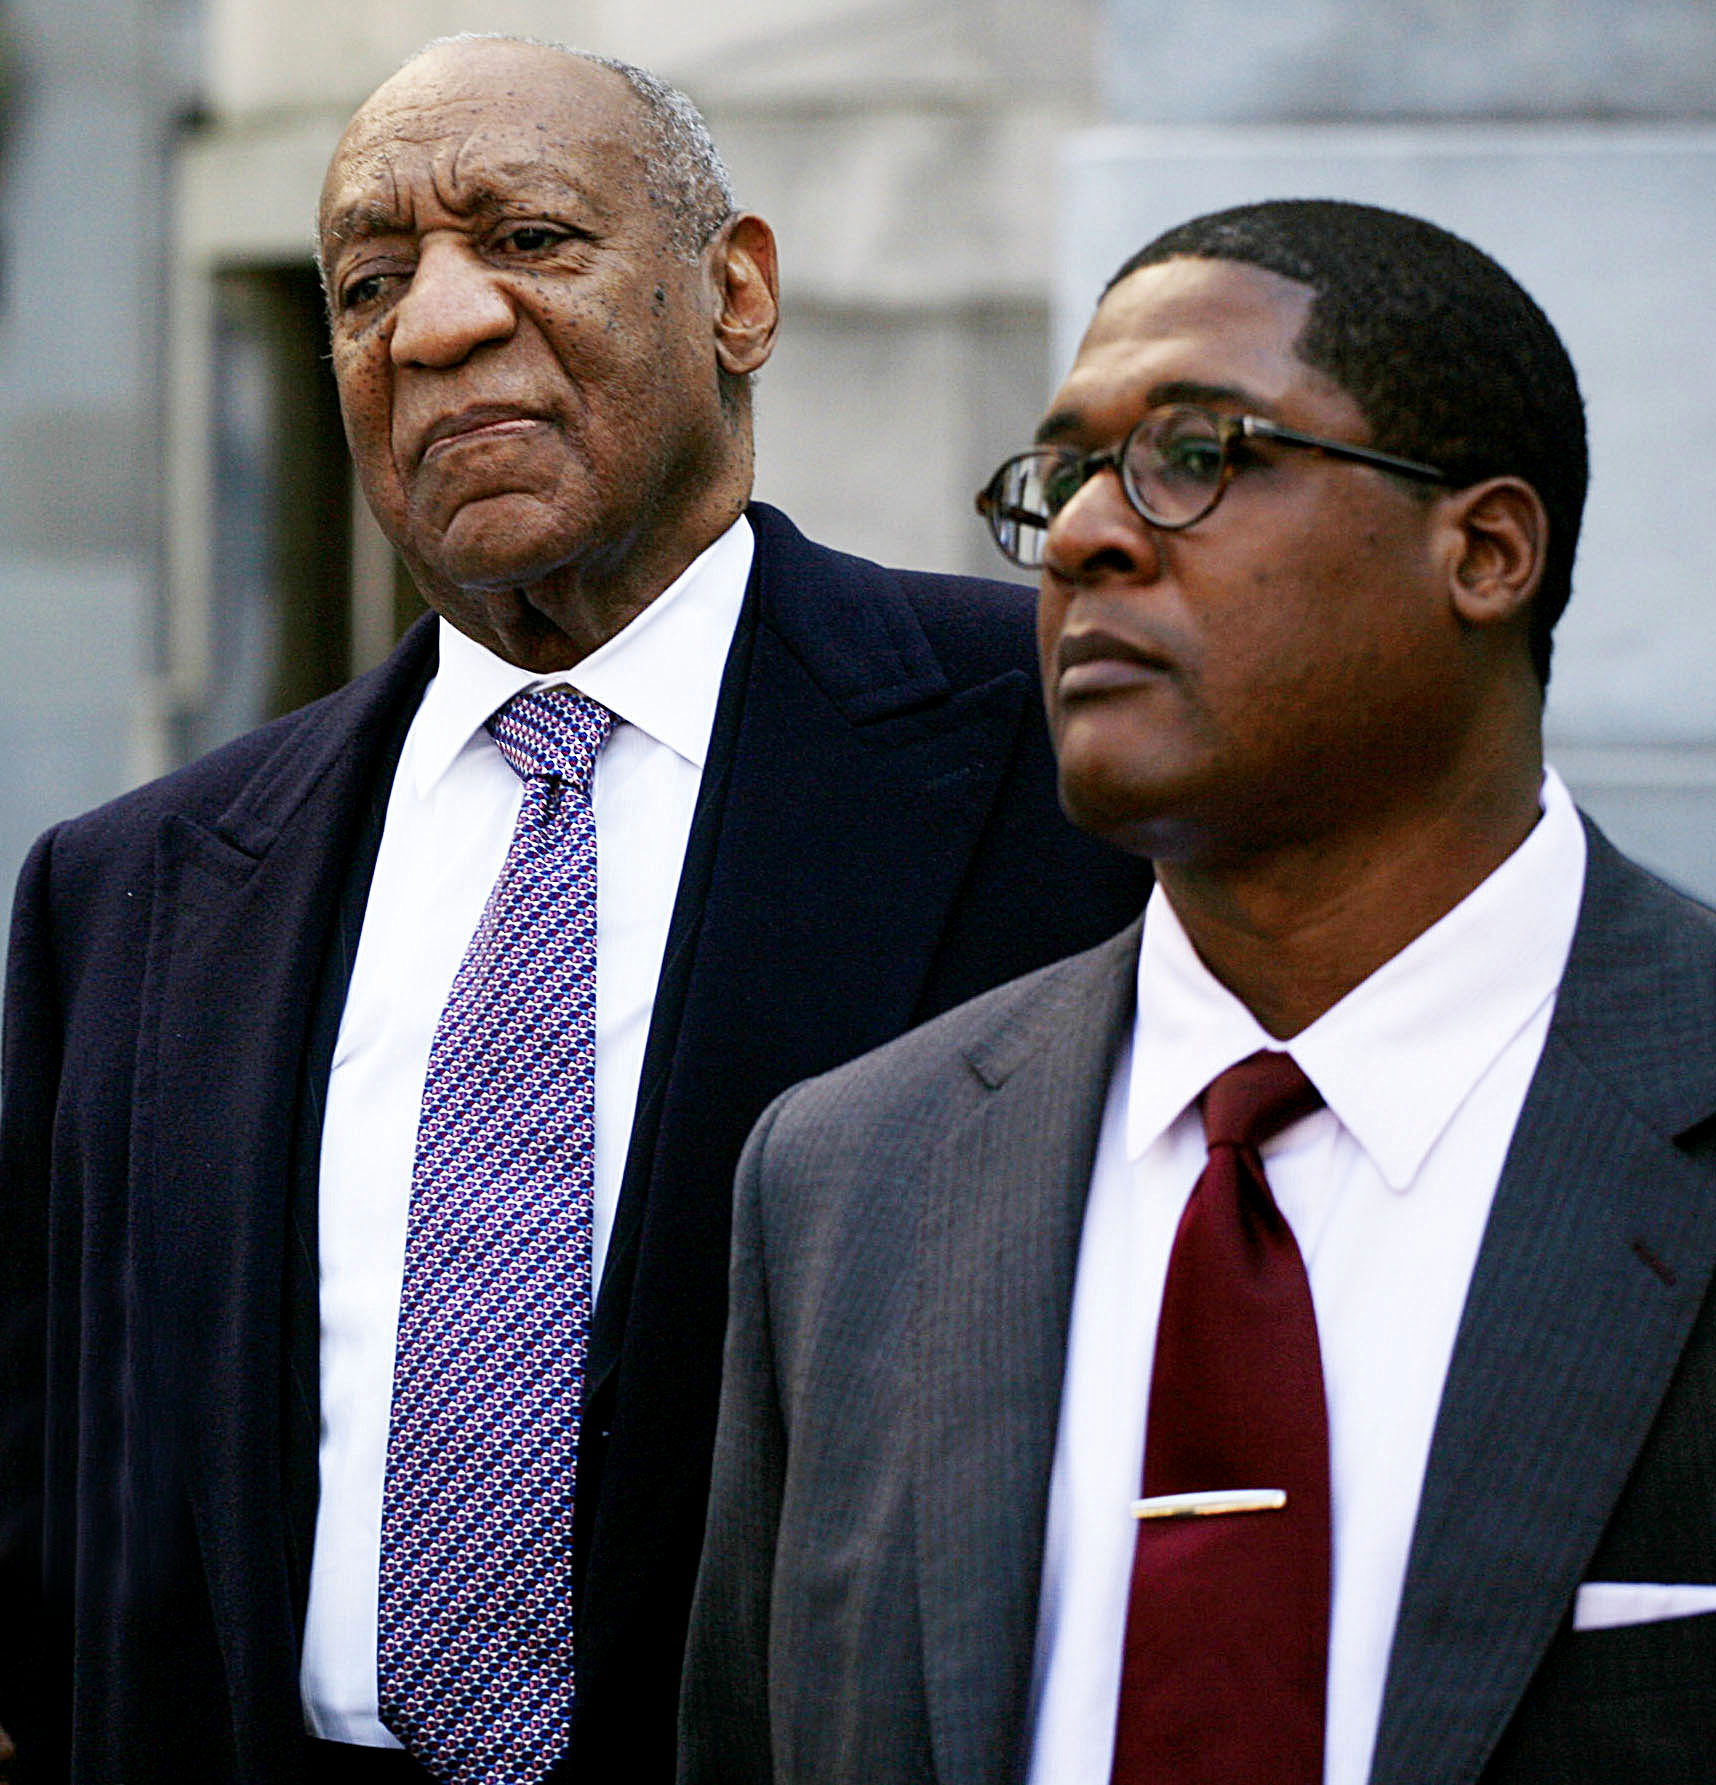 PHOTO: Bill Cosby and Andrew Wyatt in Norristown, Penn, during his retrial, April 19, 2018.